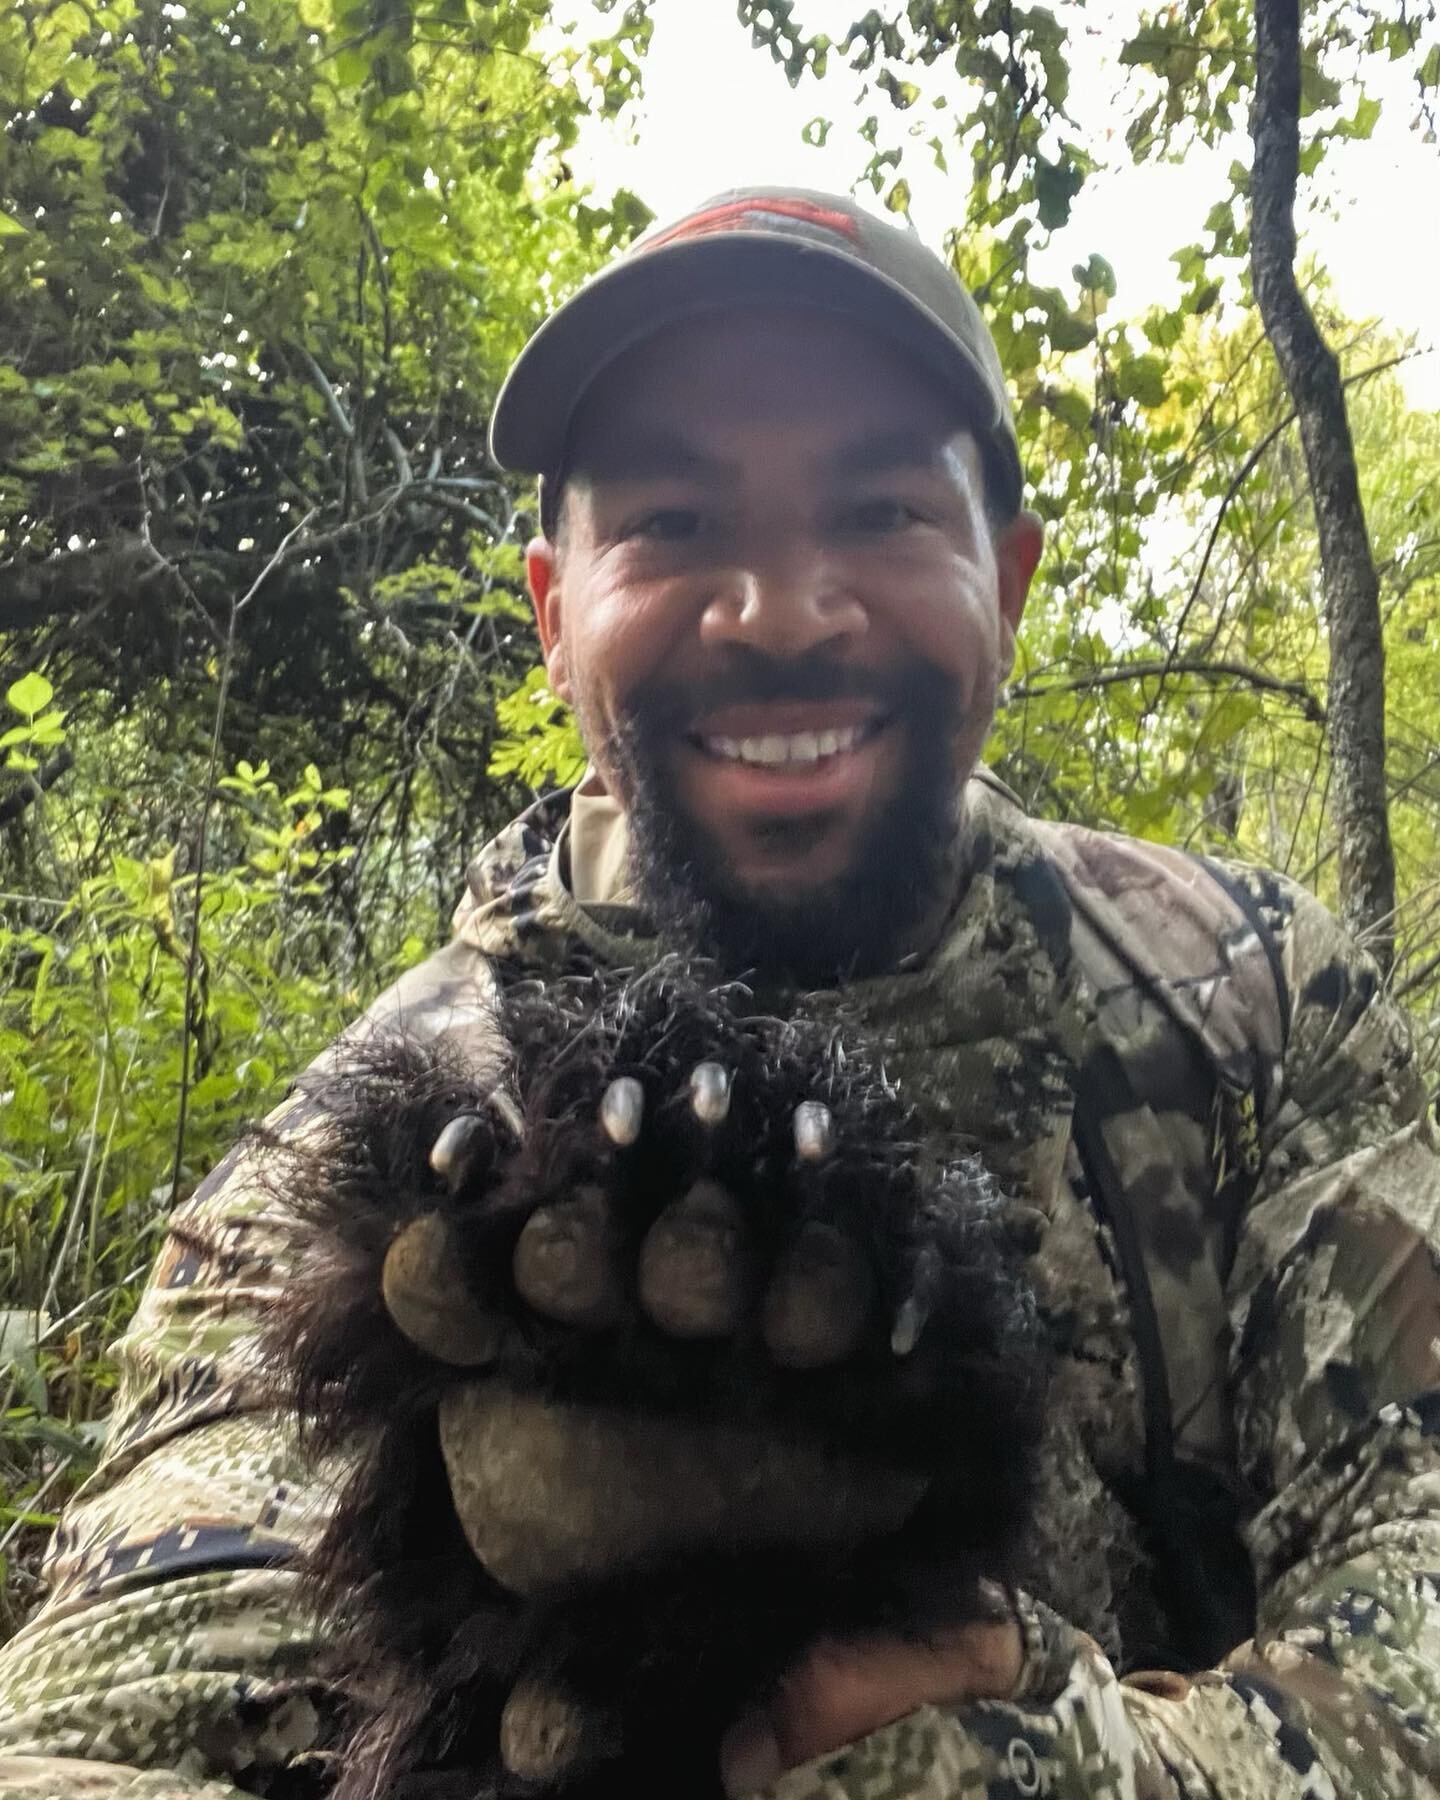 Until last year I had never even seen a black bear outside of a zoo. This year I laid eyes on 6 in the Ouchita Mountains here in Arkansas.

This success was the result of several seasons of figuring out where bears weren&rsquo;t and why. Learning to 